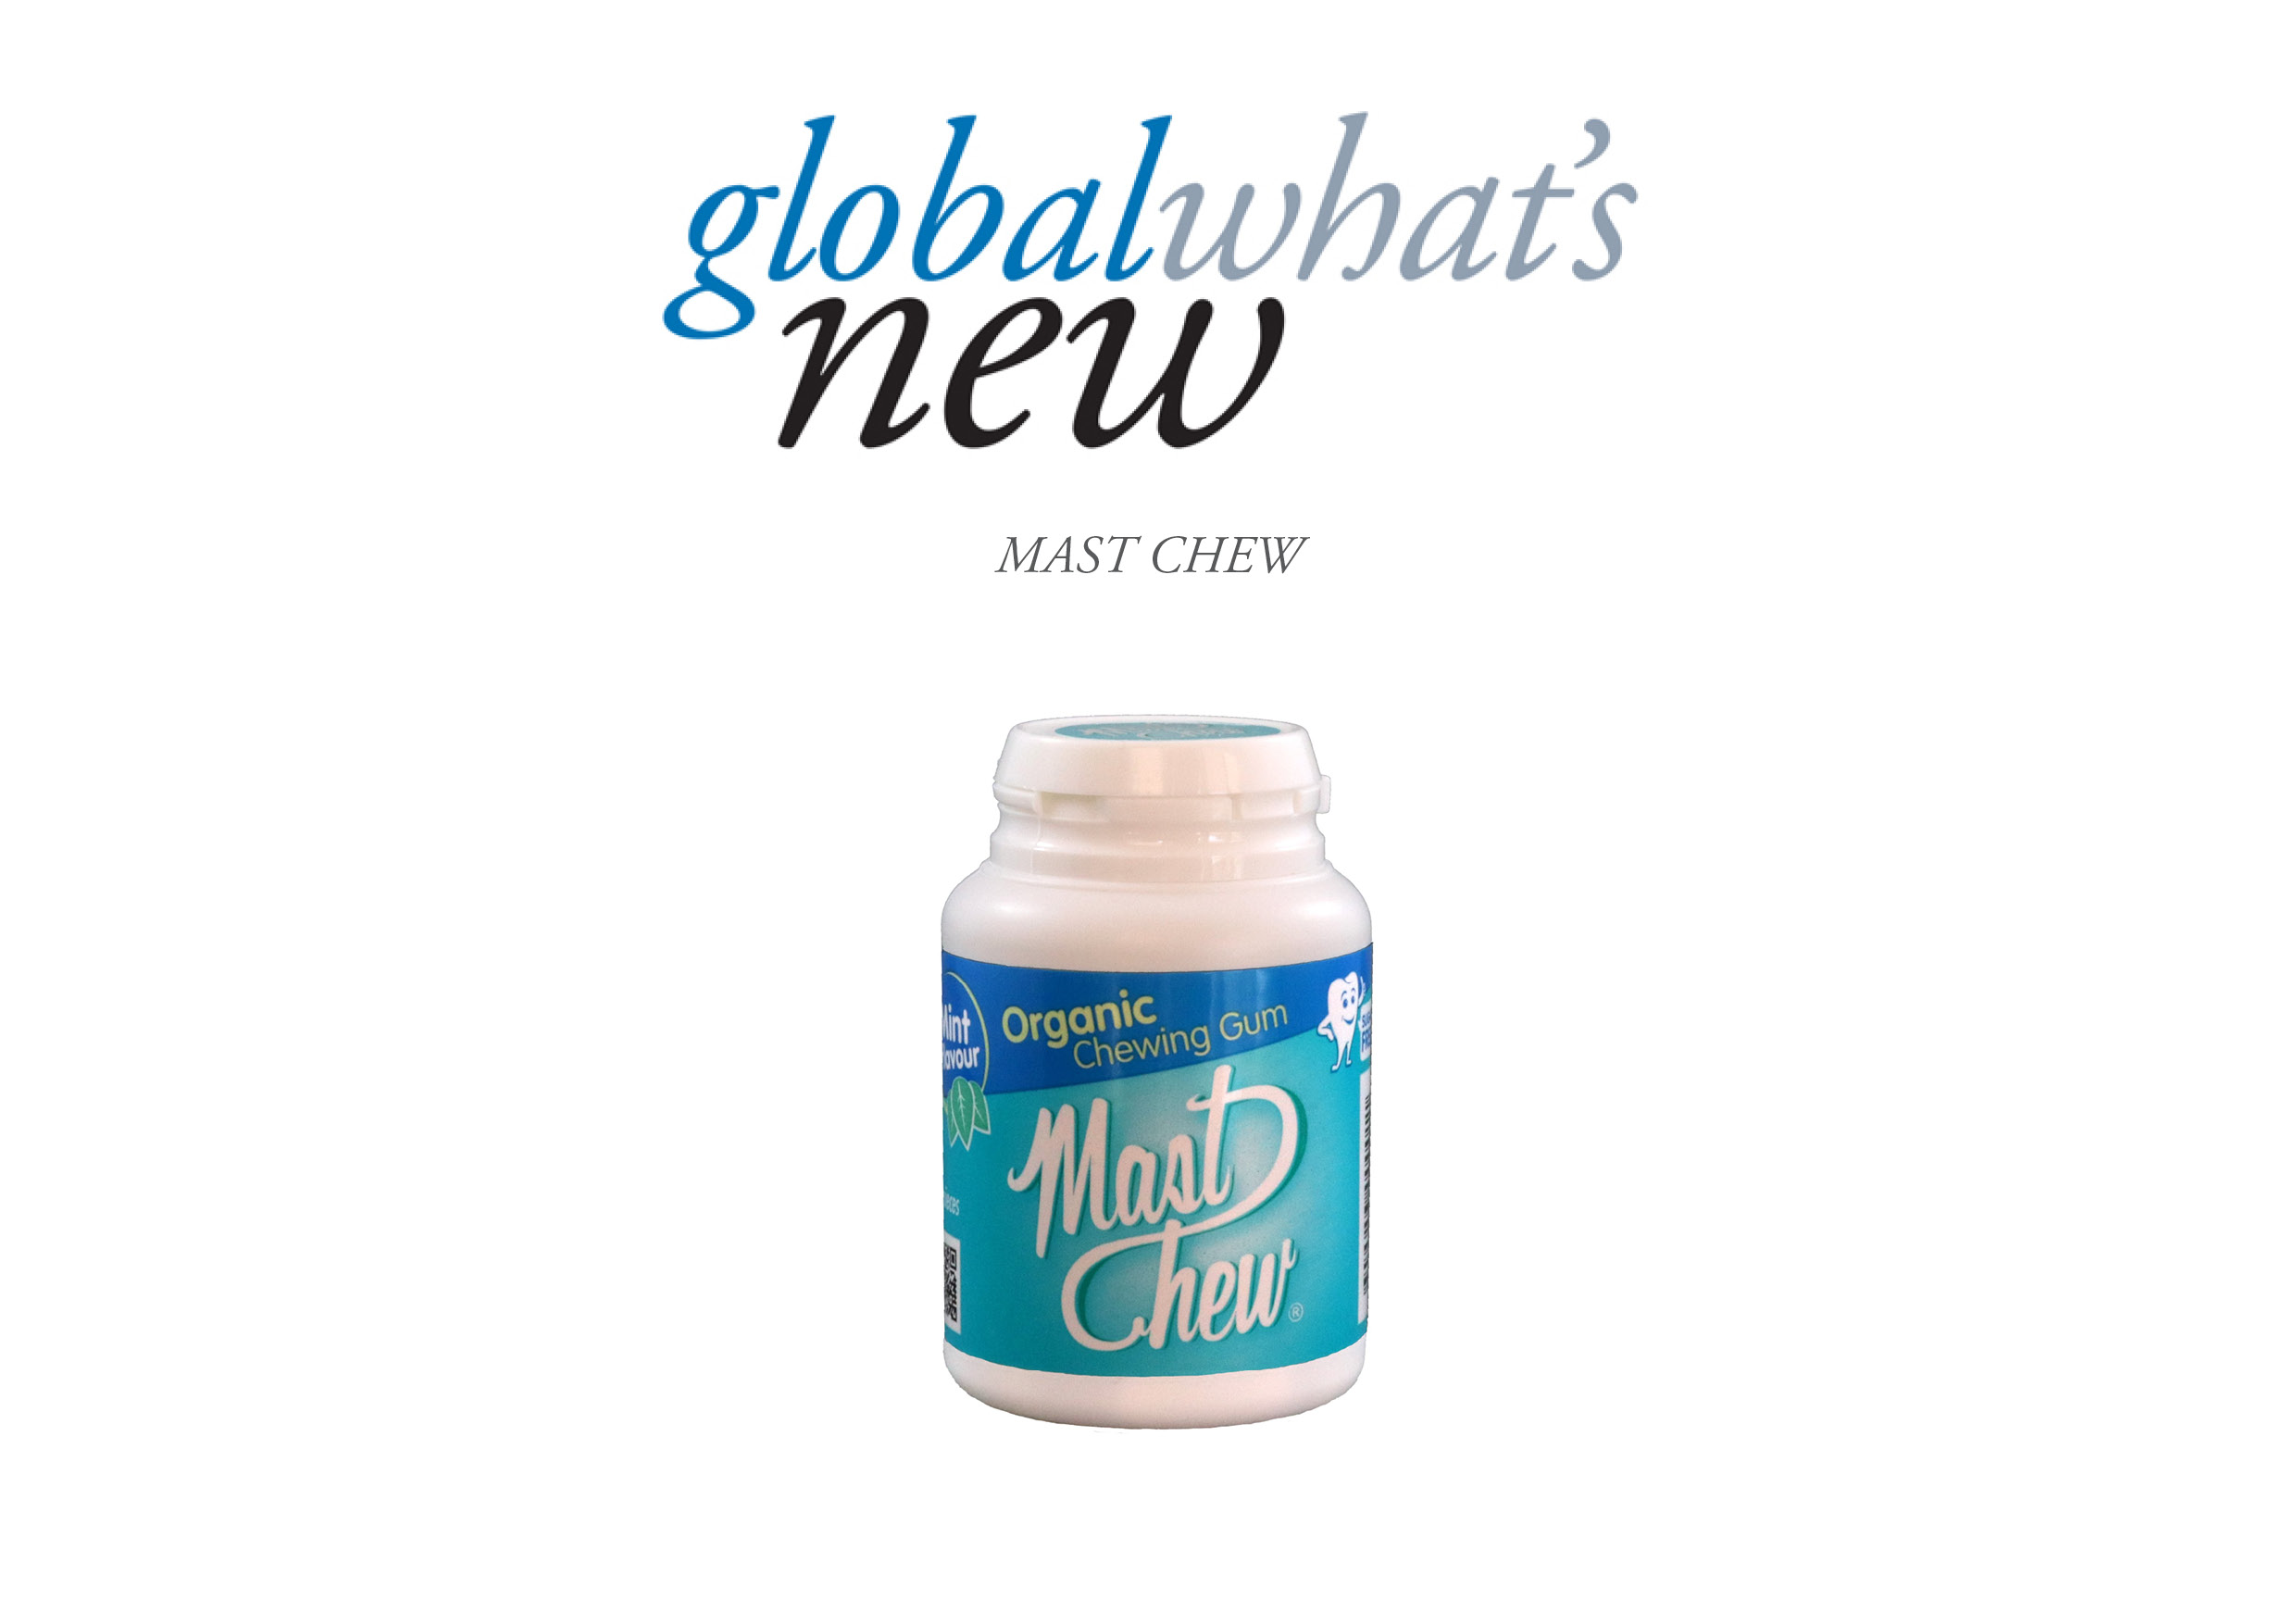 mast chew plant-based chewing gum with a global what's new header